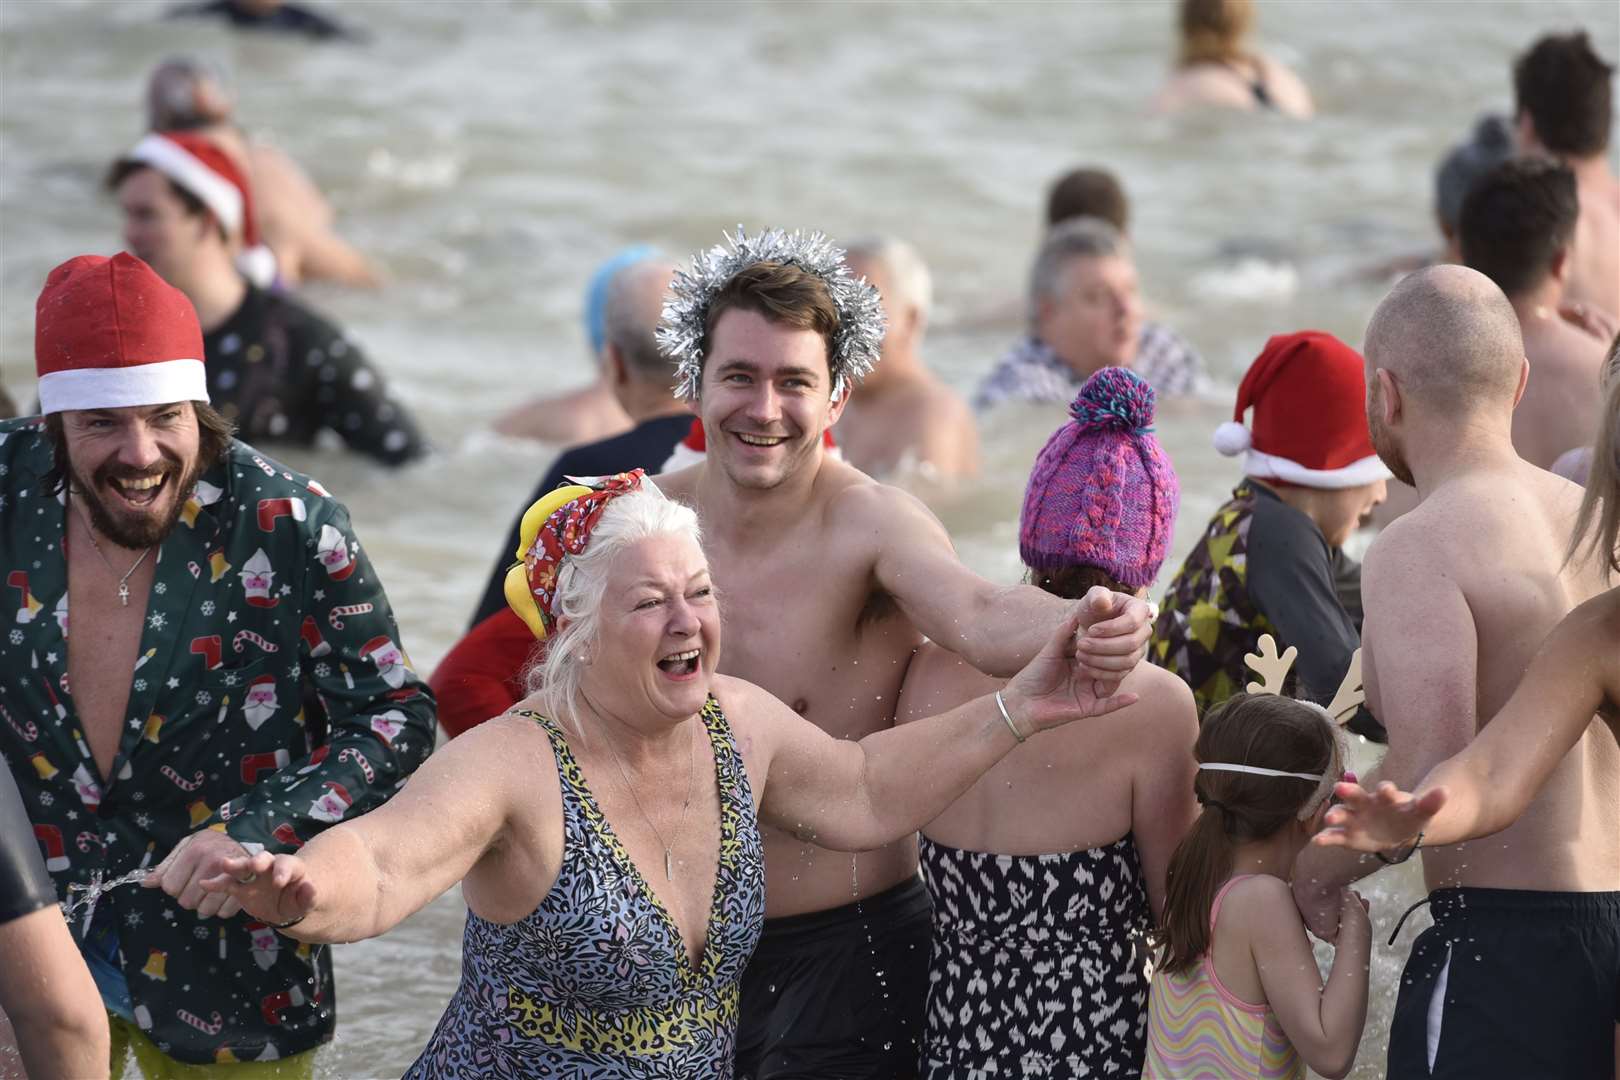 All smiles and fun as the Boxing Day dippers in Deal take the plunge. Picture: Carol Fenton/The Unofficial Photographer